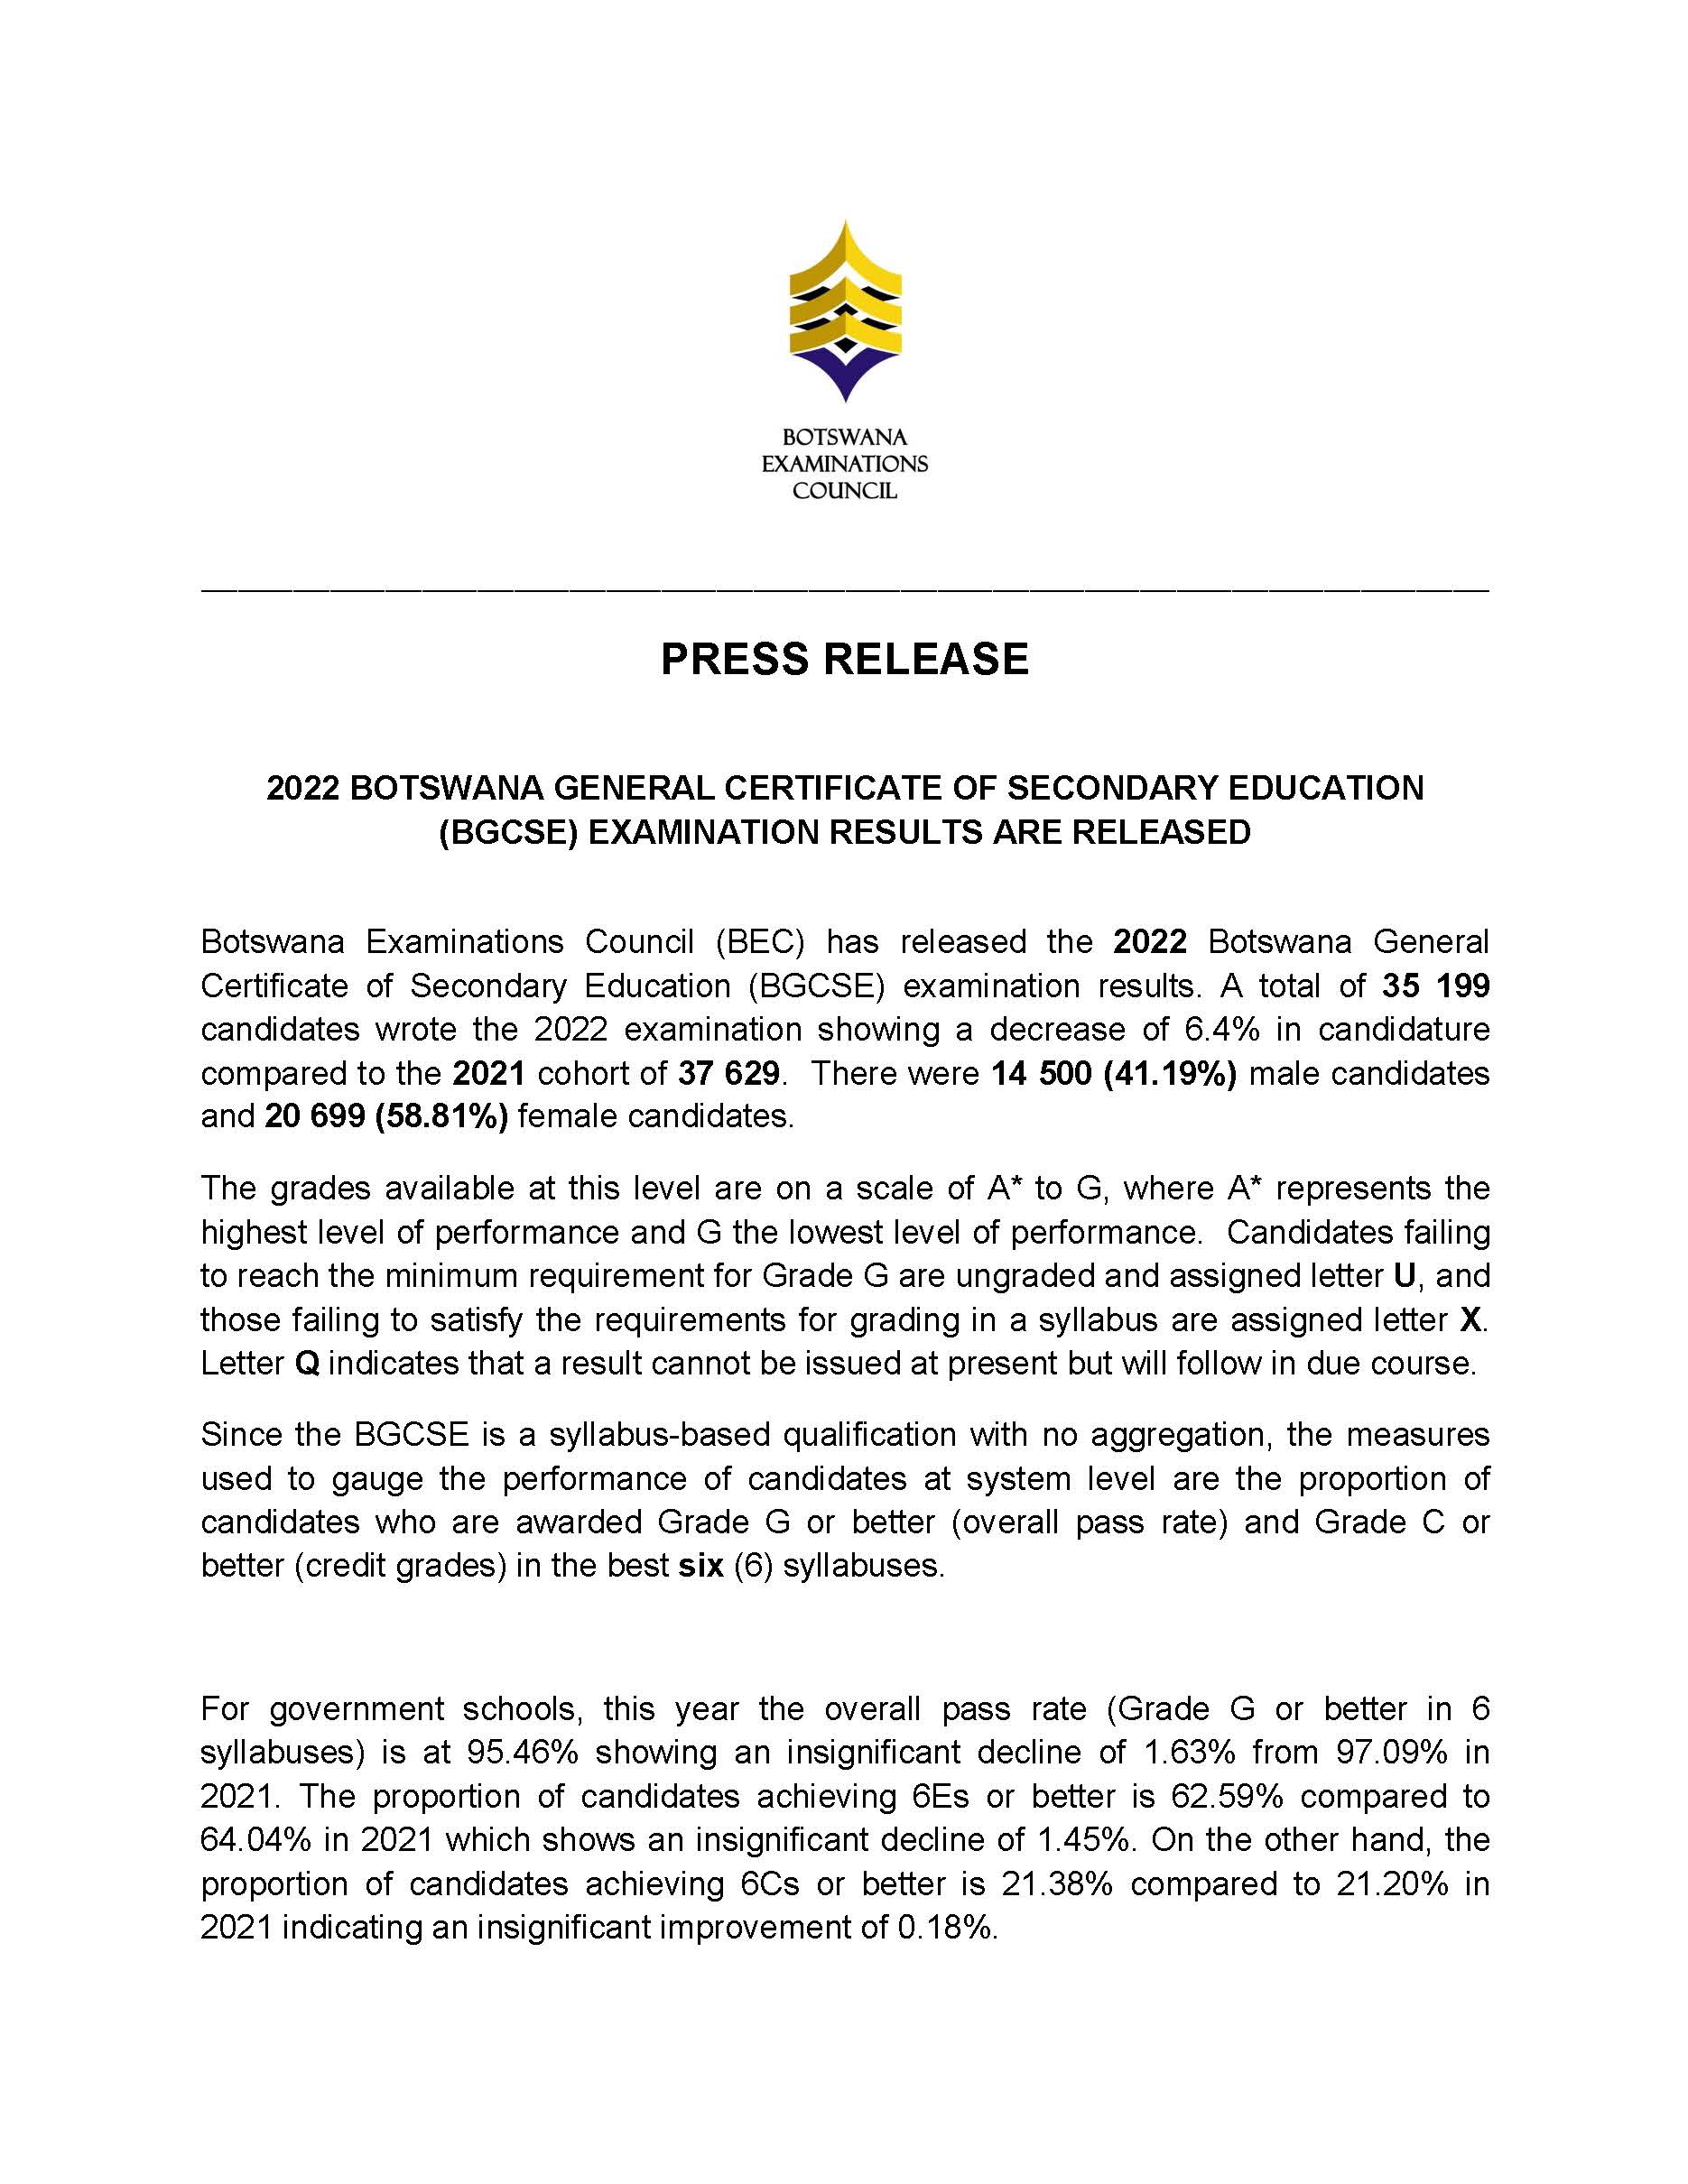 Press_Release_2022_BGCSE_Results_21.02.2023_Page_1.jpg